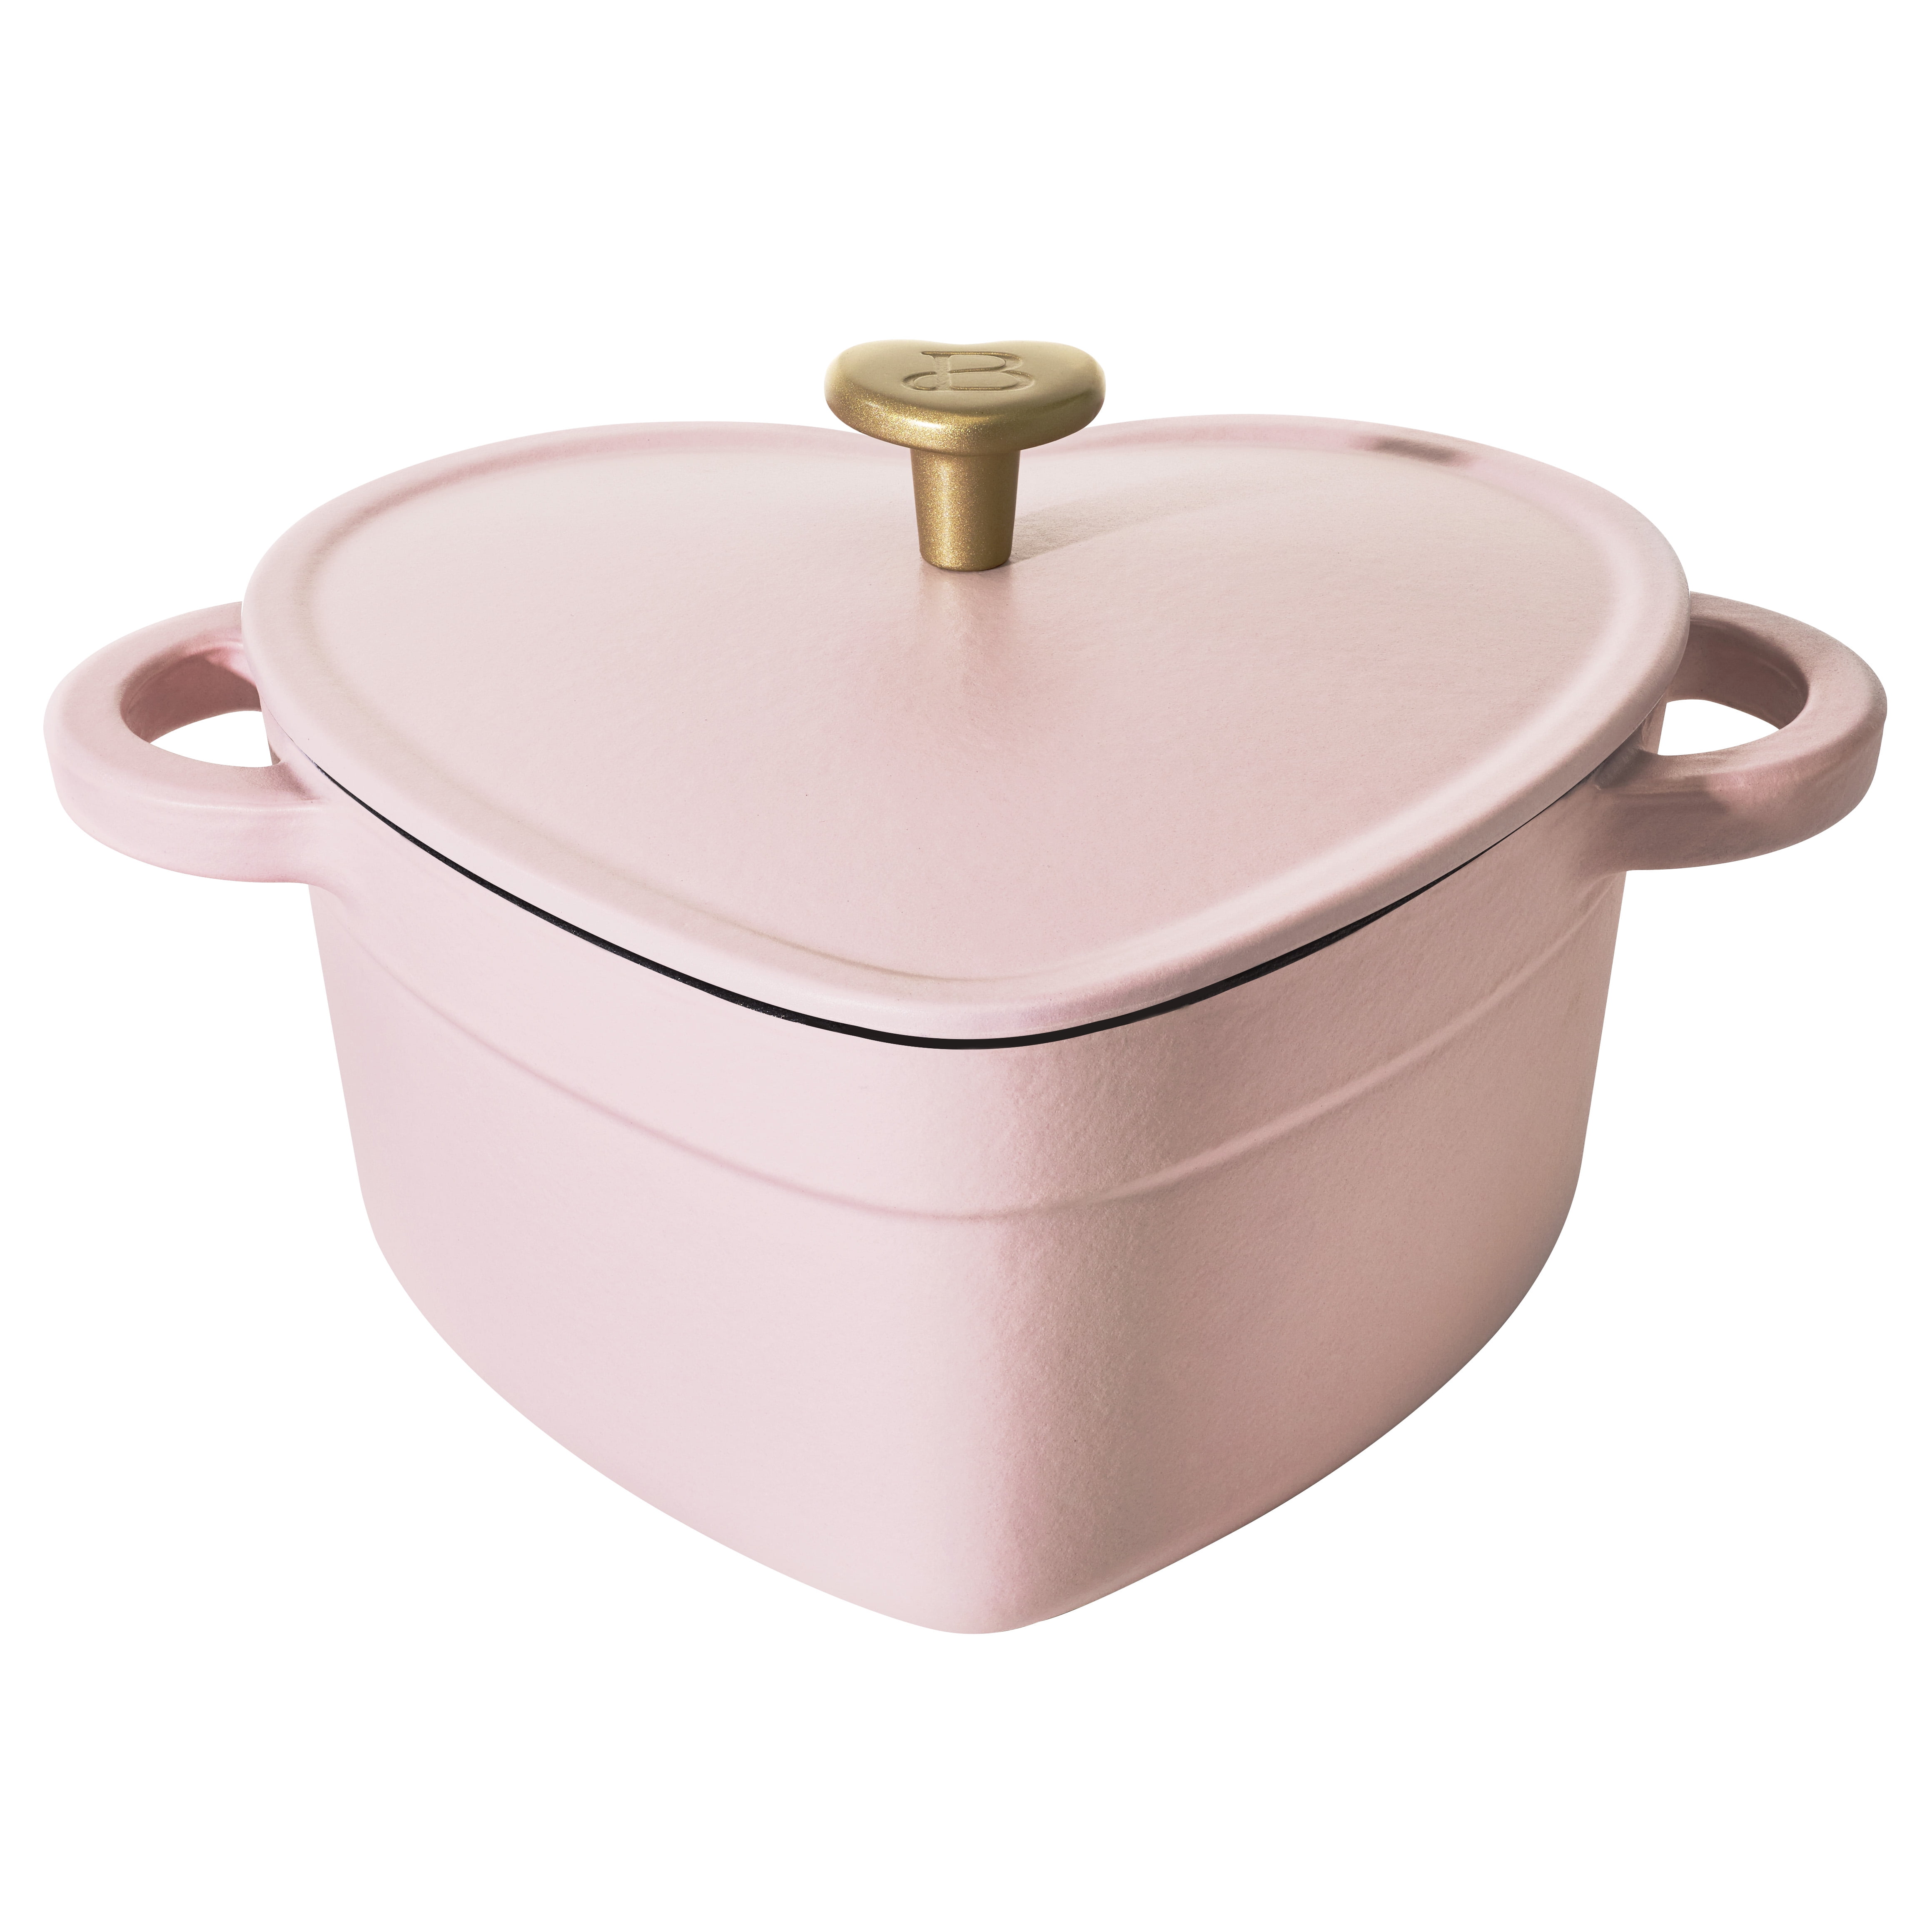 23CM Pink Flower Dutch Oven Enameled Cast Iron Pot With Lid